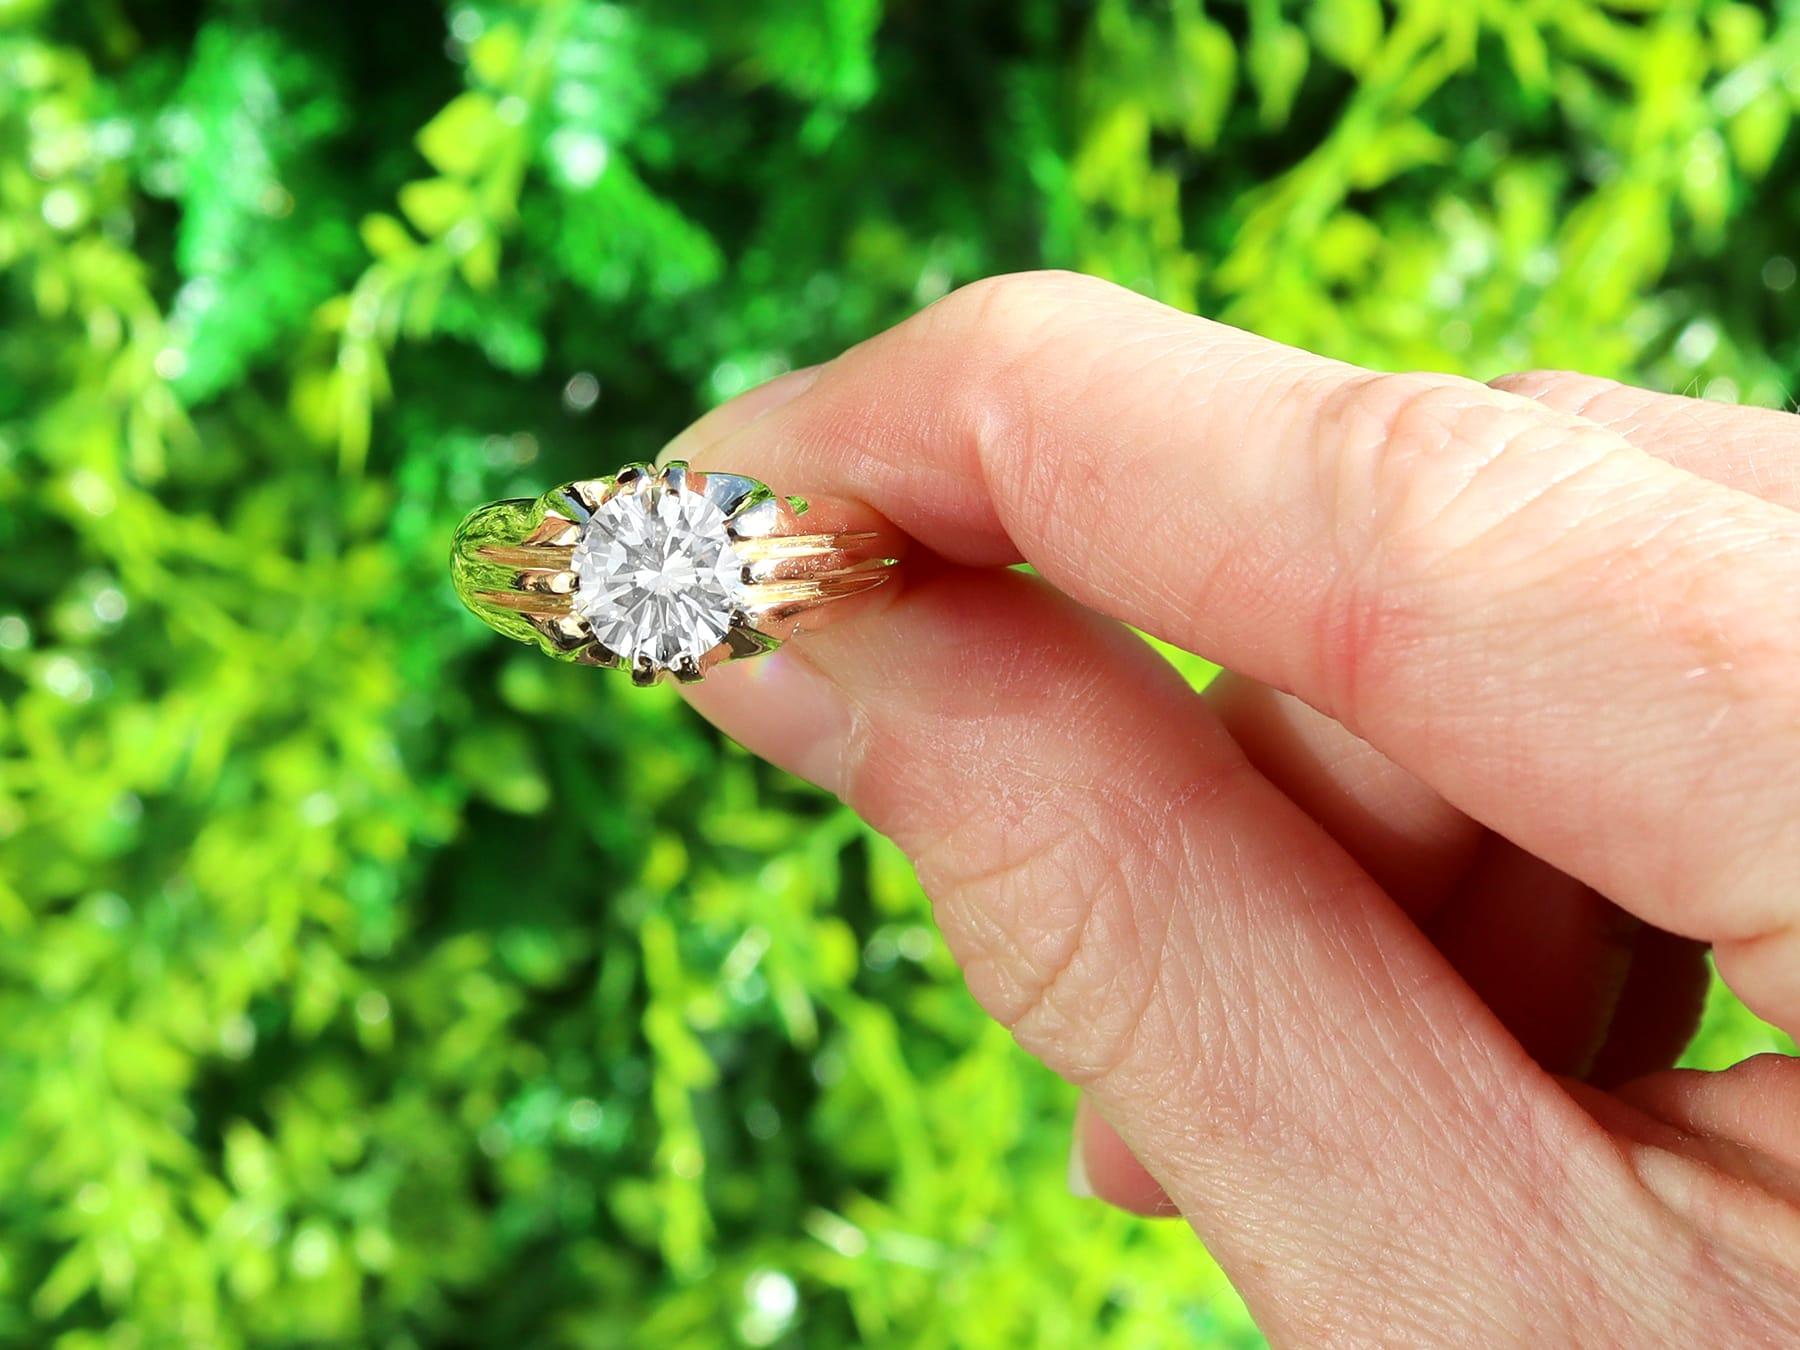 A stunning, fine and impressive, large vintage 1.85 carat diamond and 18 karat yellow gold solitaire/signet ring; part our vintage jewelry and estate jewelry collections

This stunning vintage diamond ring has been crafted in 18k yellow gold.

This